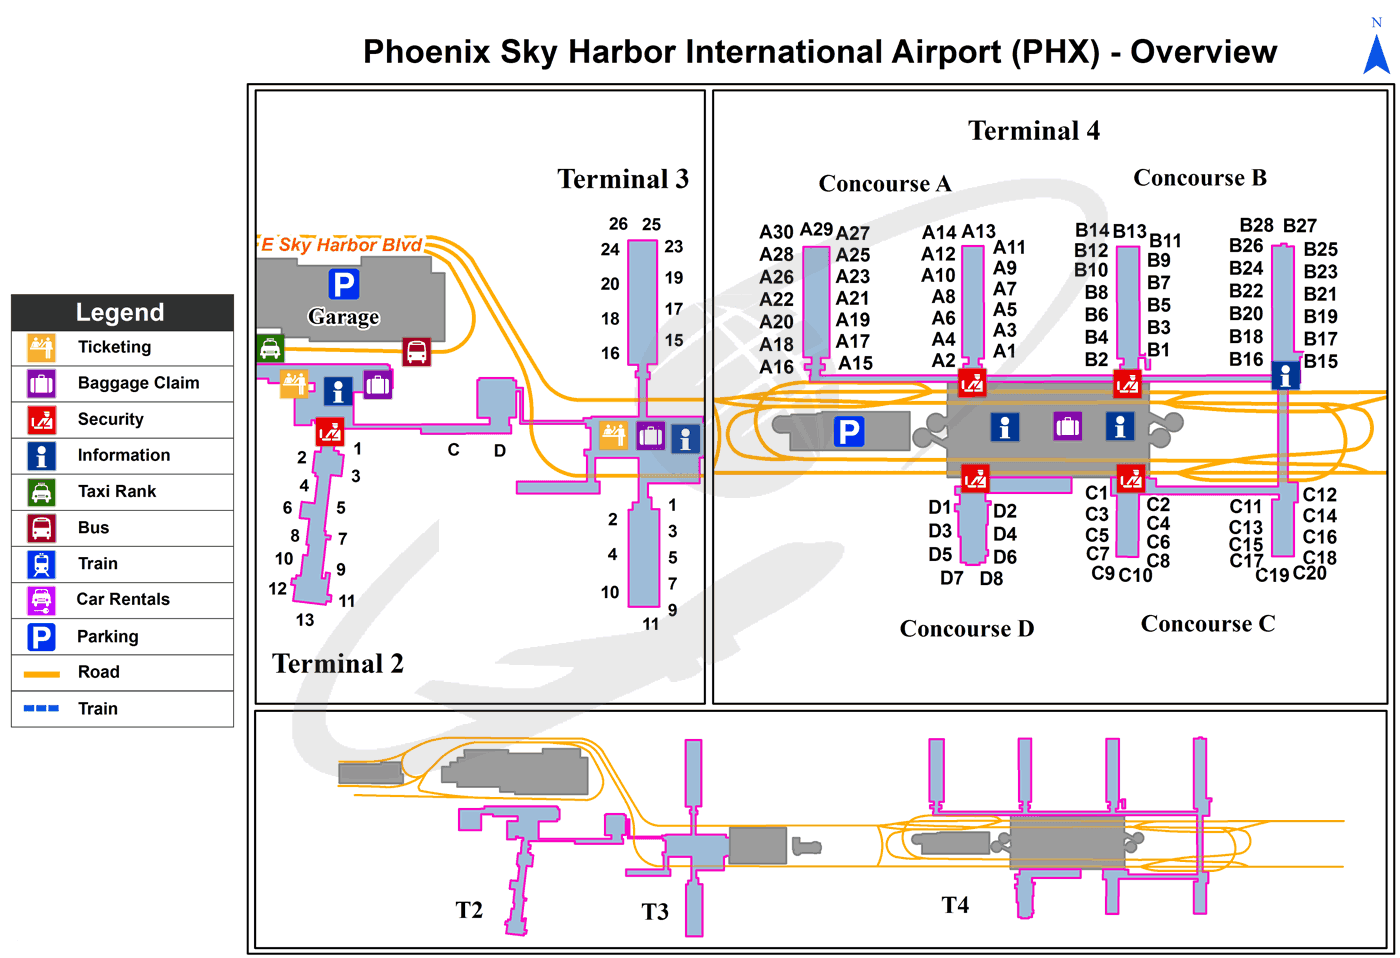 PHX_overview_map